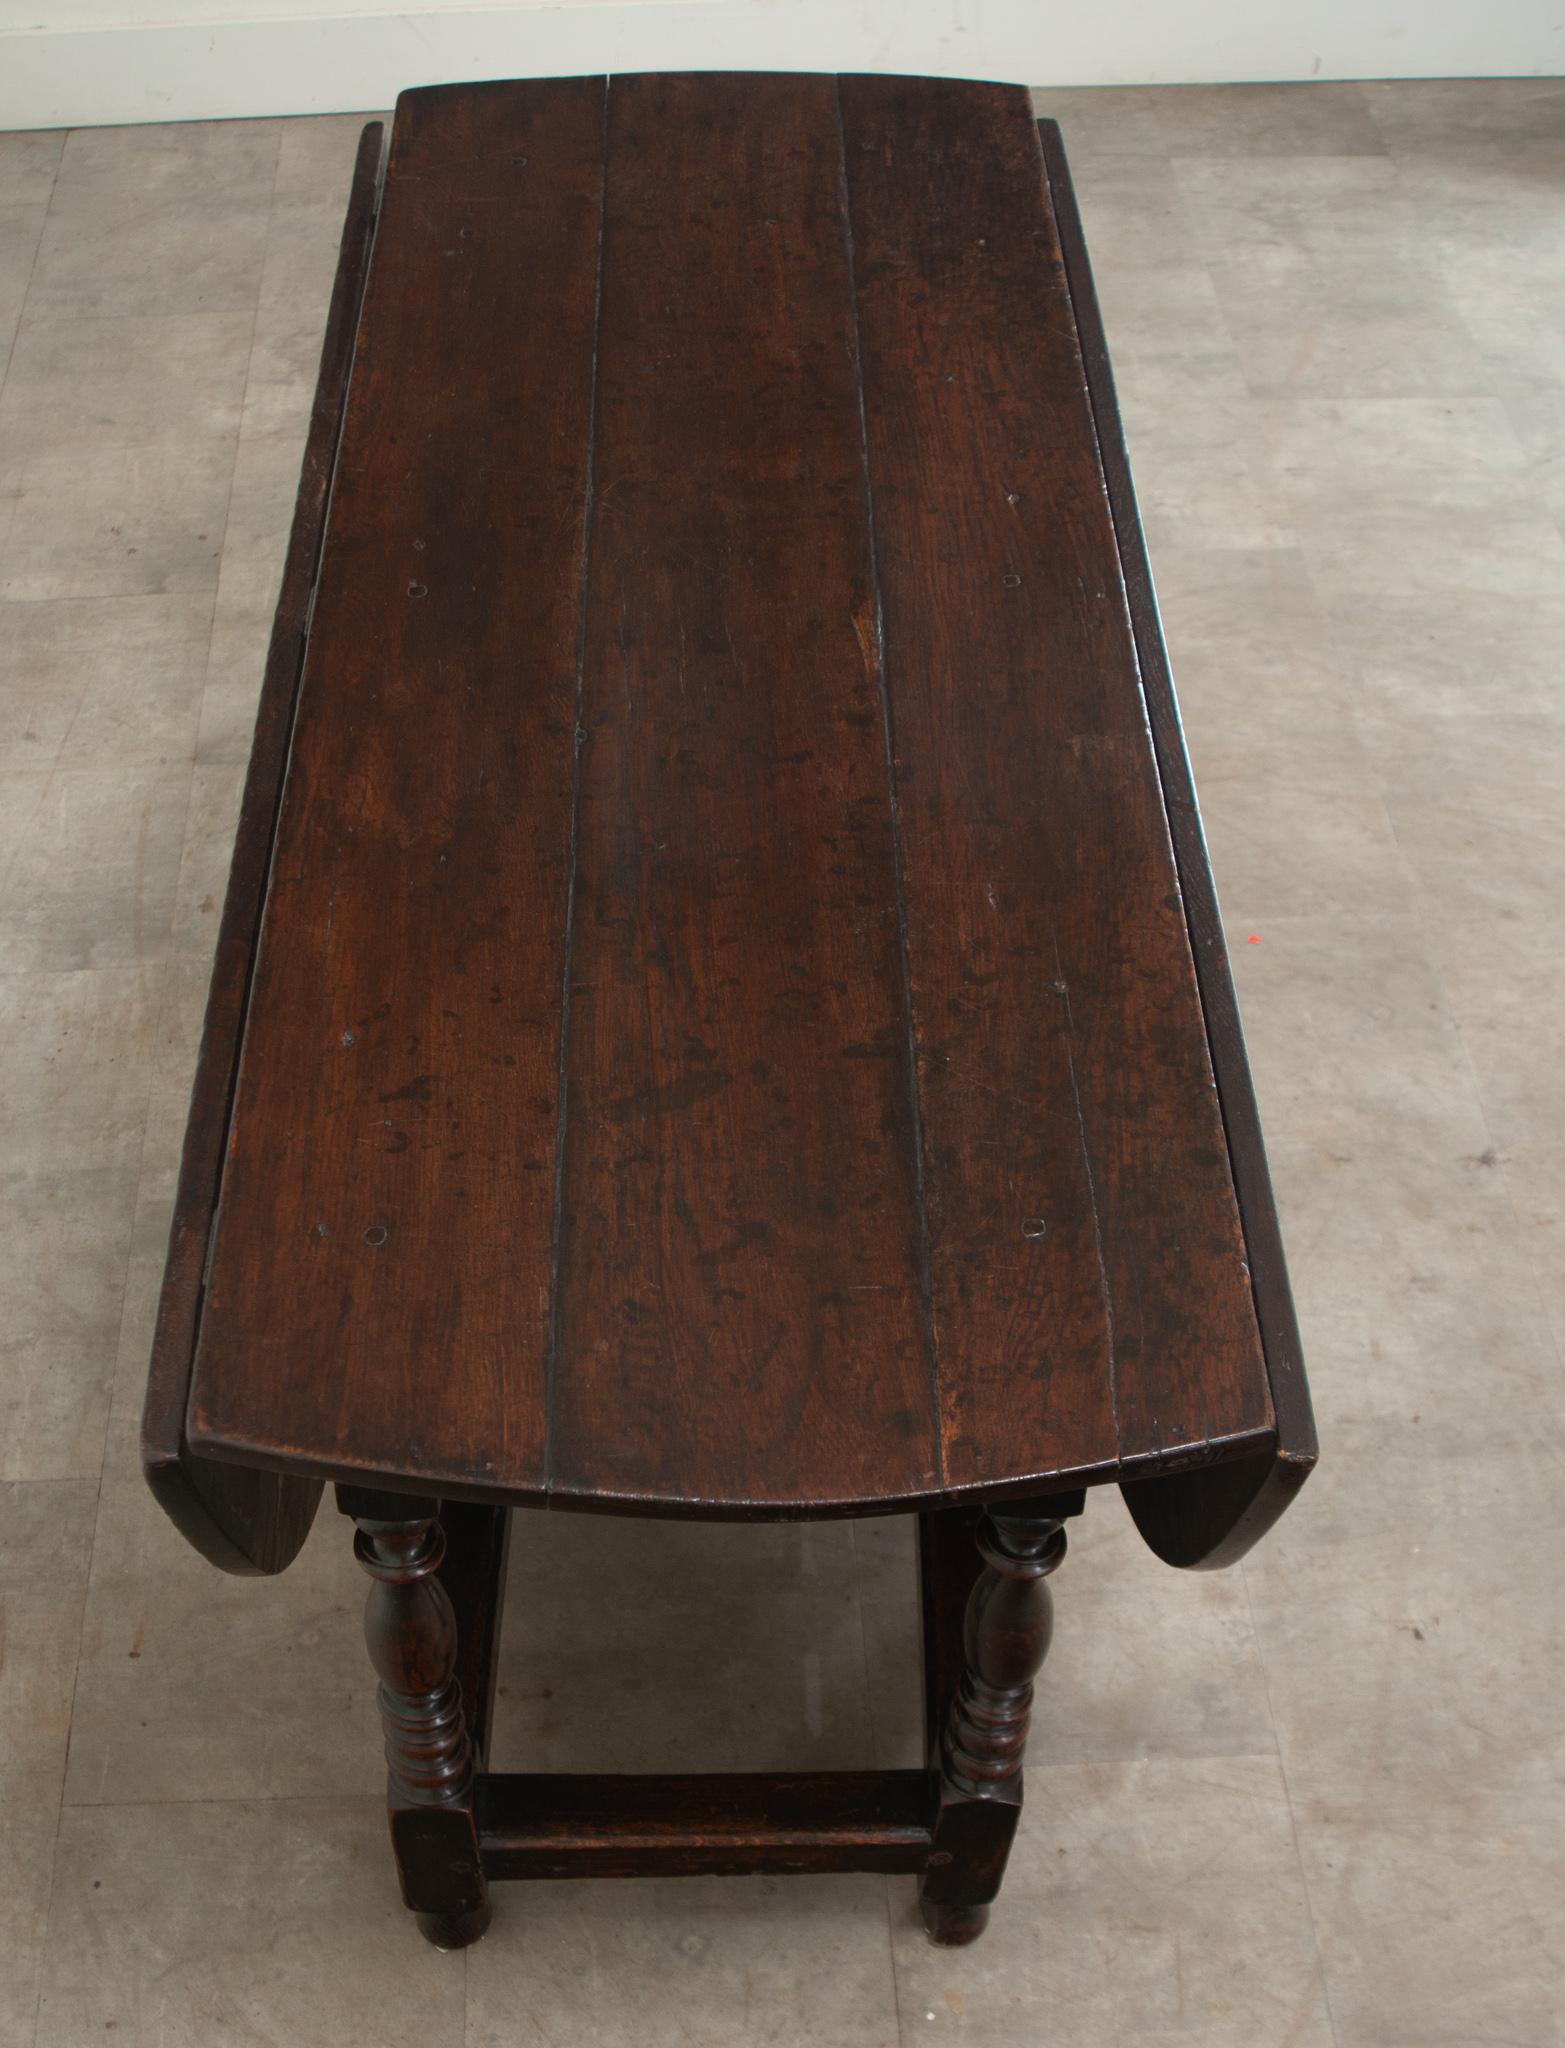 English Solid Oak Gateleg Drop Leaf Table In Good Condition For Sale In Baton Rouge, LA